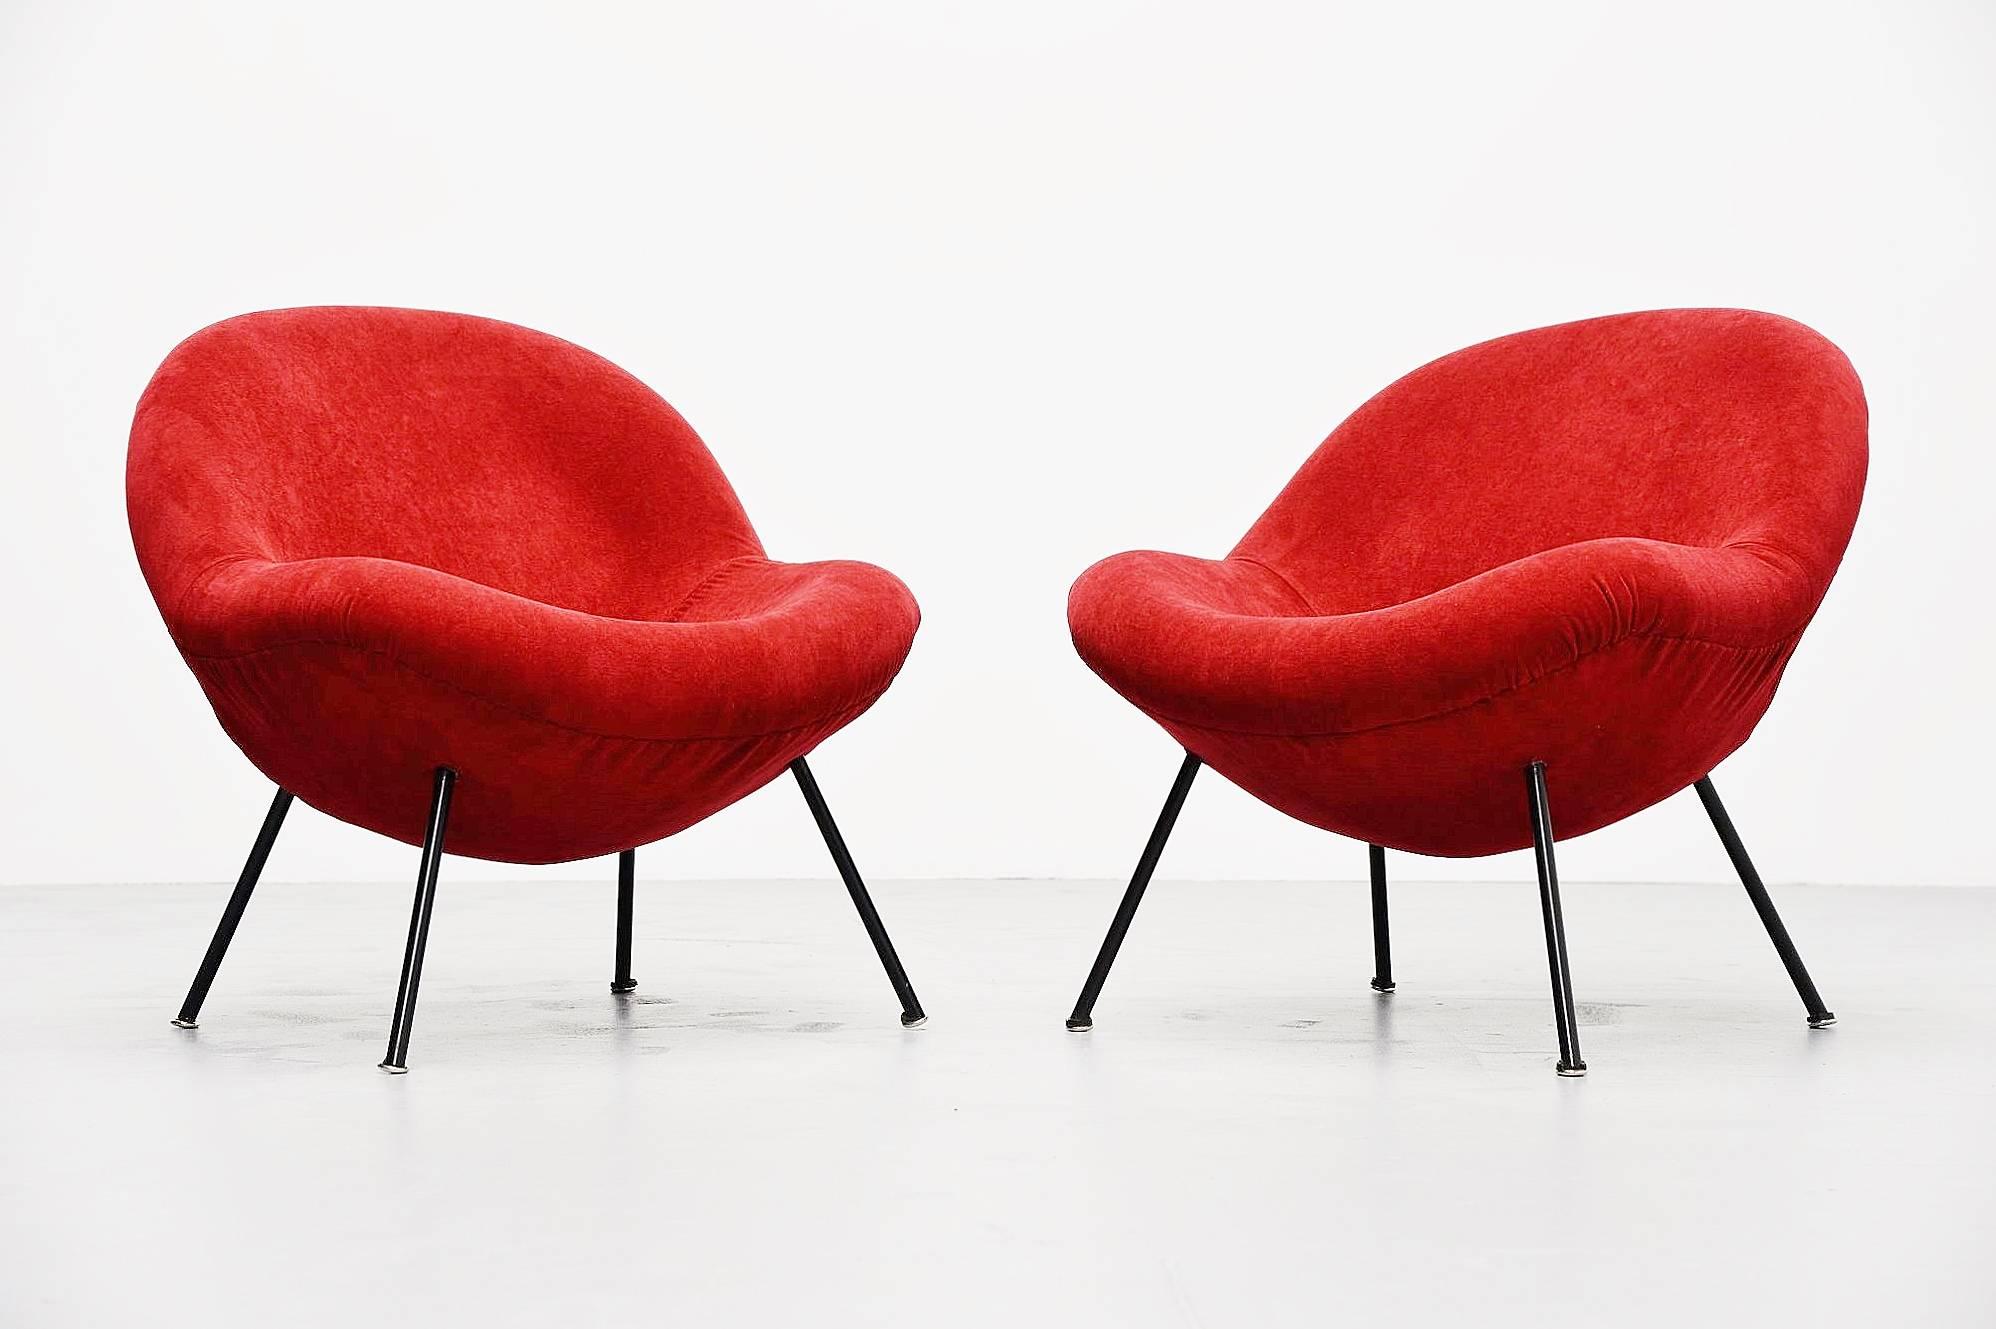 Comfortable pair of egg chairs designed by Fritz Neth, manufactured by Sitzformbau, Kassel Germany 1955. These chairs have a black lacquered metal structure filled with a foam seat and covered with red velvet upholstery. The chairs seat very